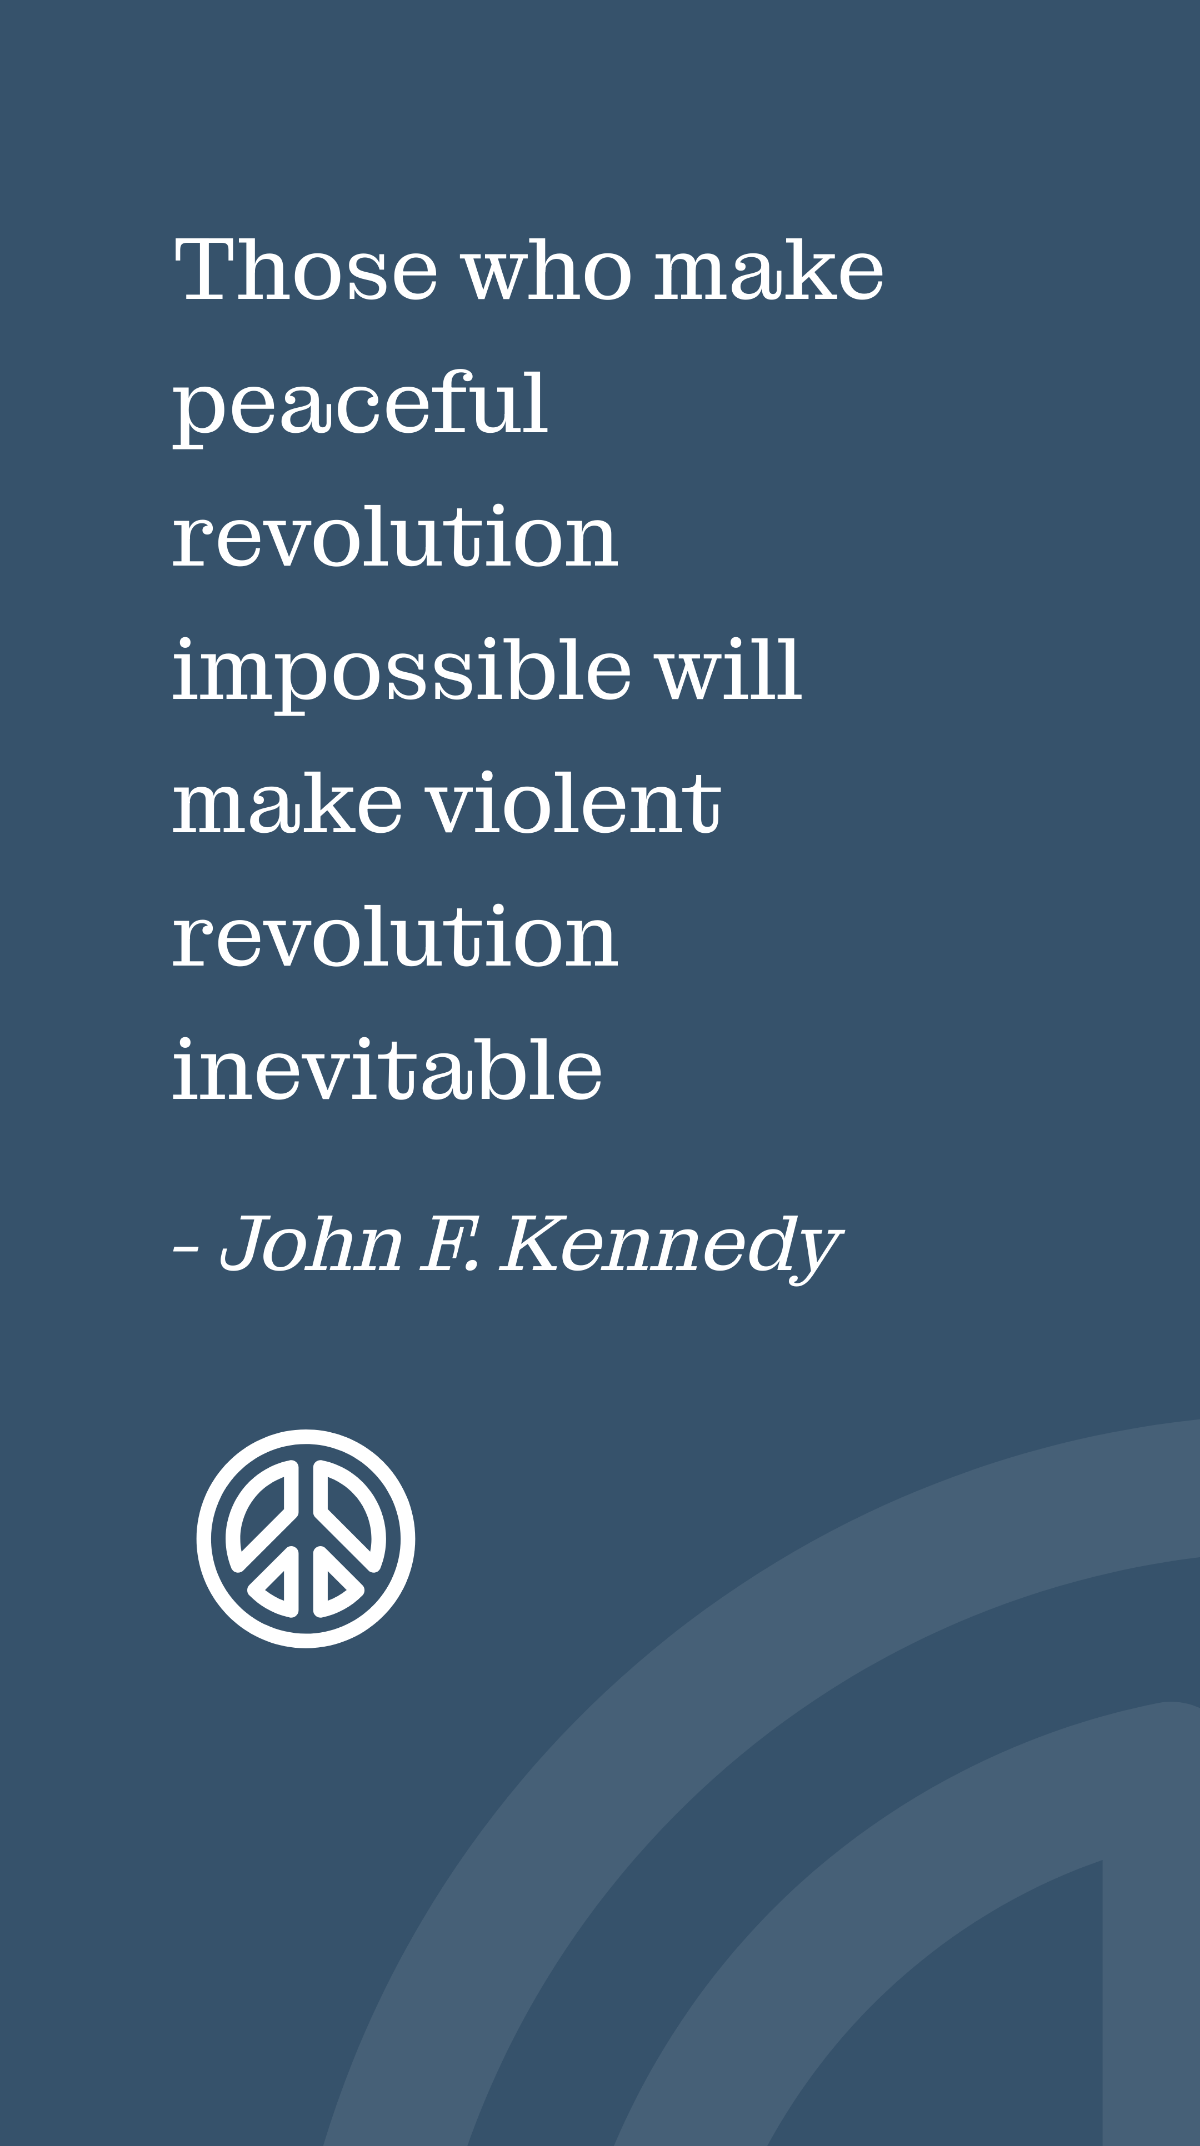 Free John F. Kennedy - Those who make peaceful revolution impossible will make violent revolution inevitable Template